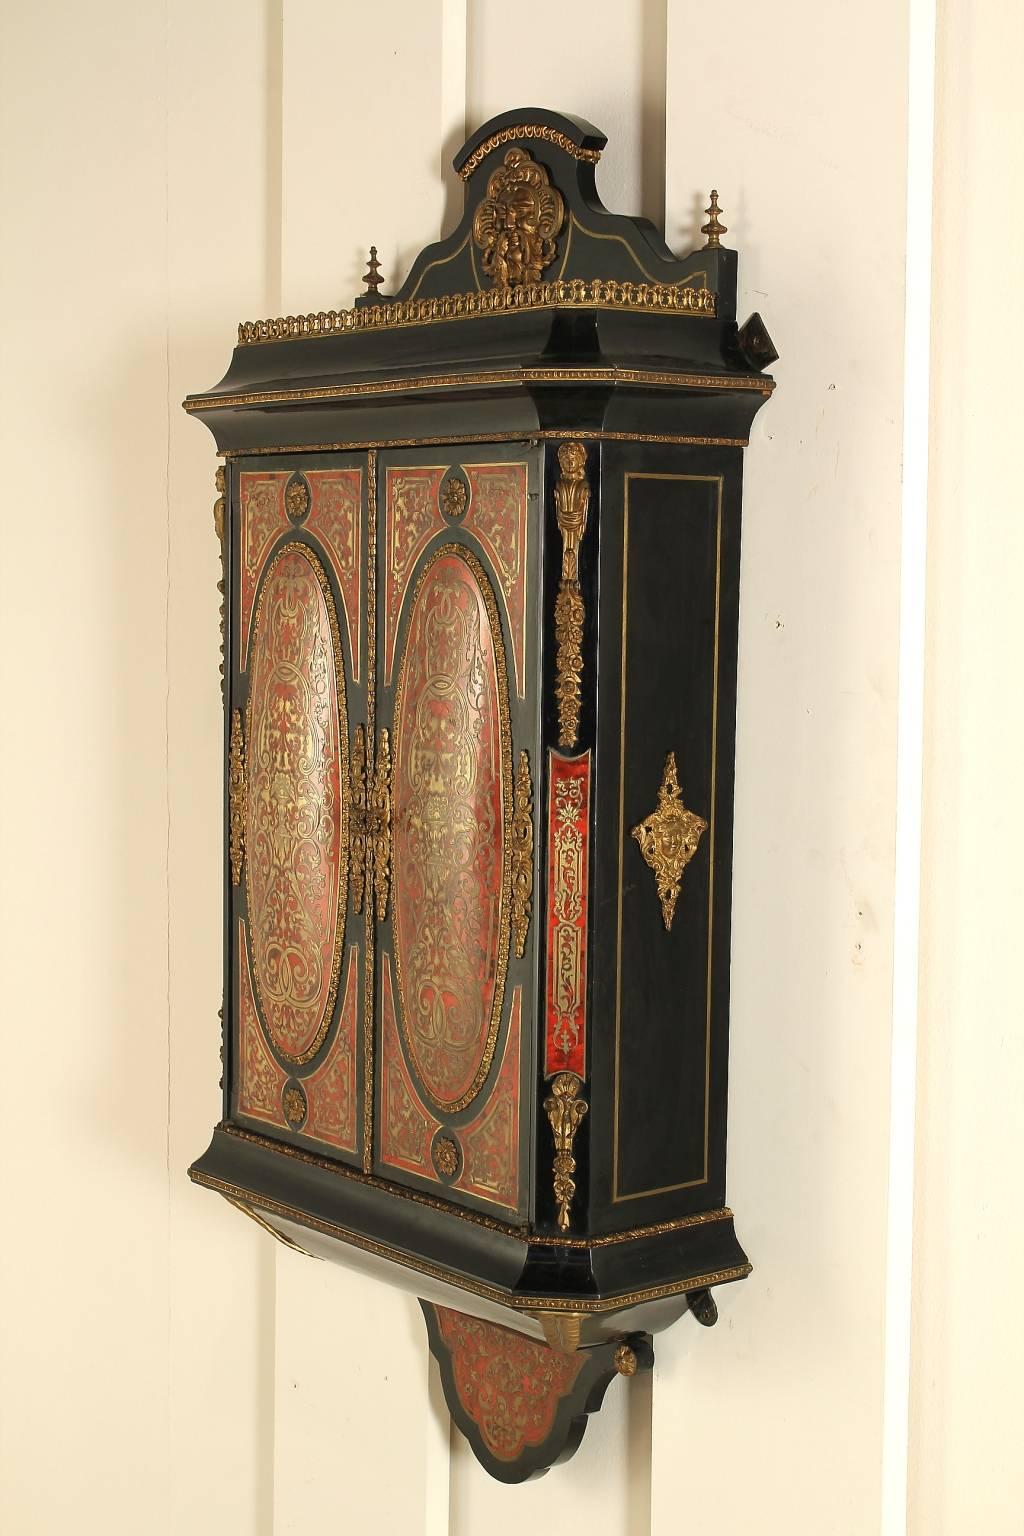 Napoleon III hanging cabinet, Boulle style, with basement and apron. Two doors with curved panels. Railings on the top and crest with mask. Turtle inserts with brass inlays, friezes and gilded brass frames. Manufactured in France, late 19th century.